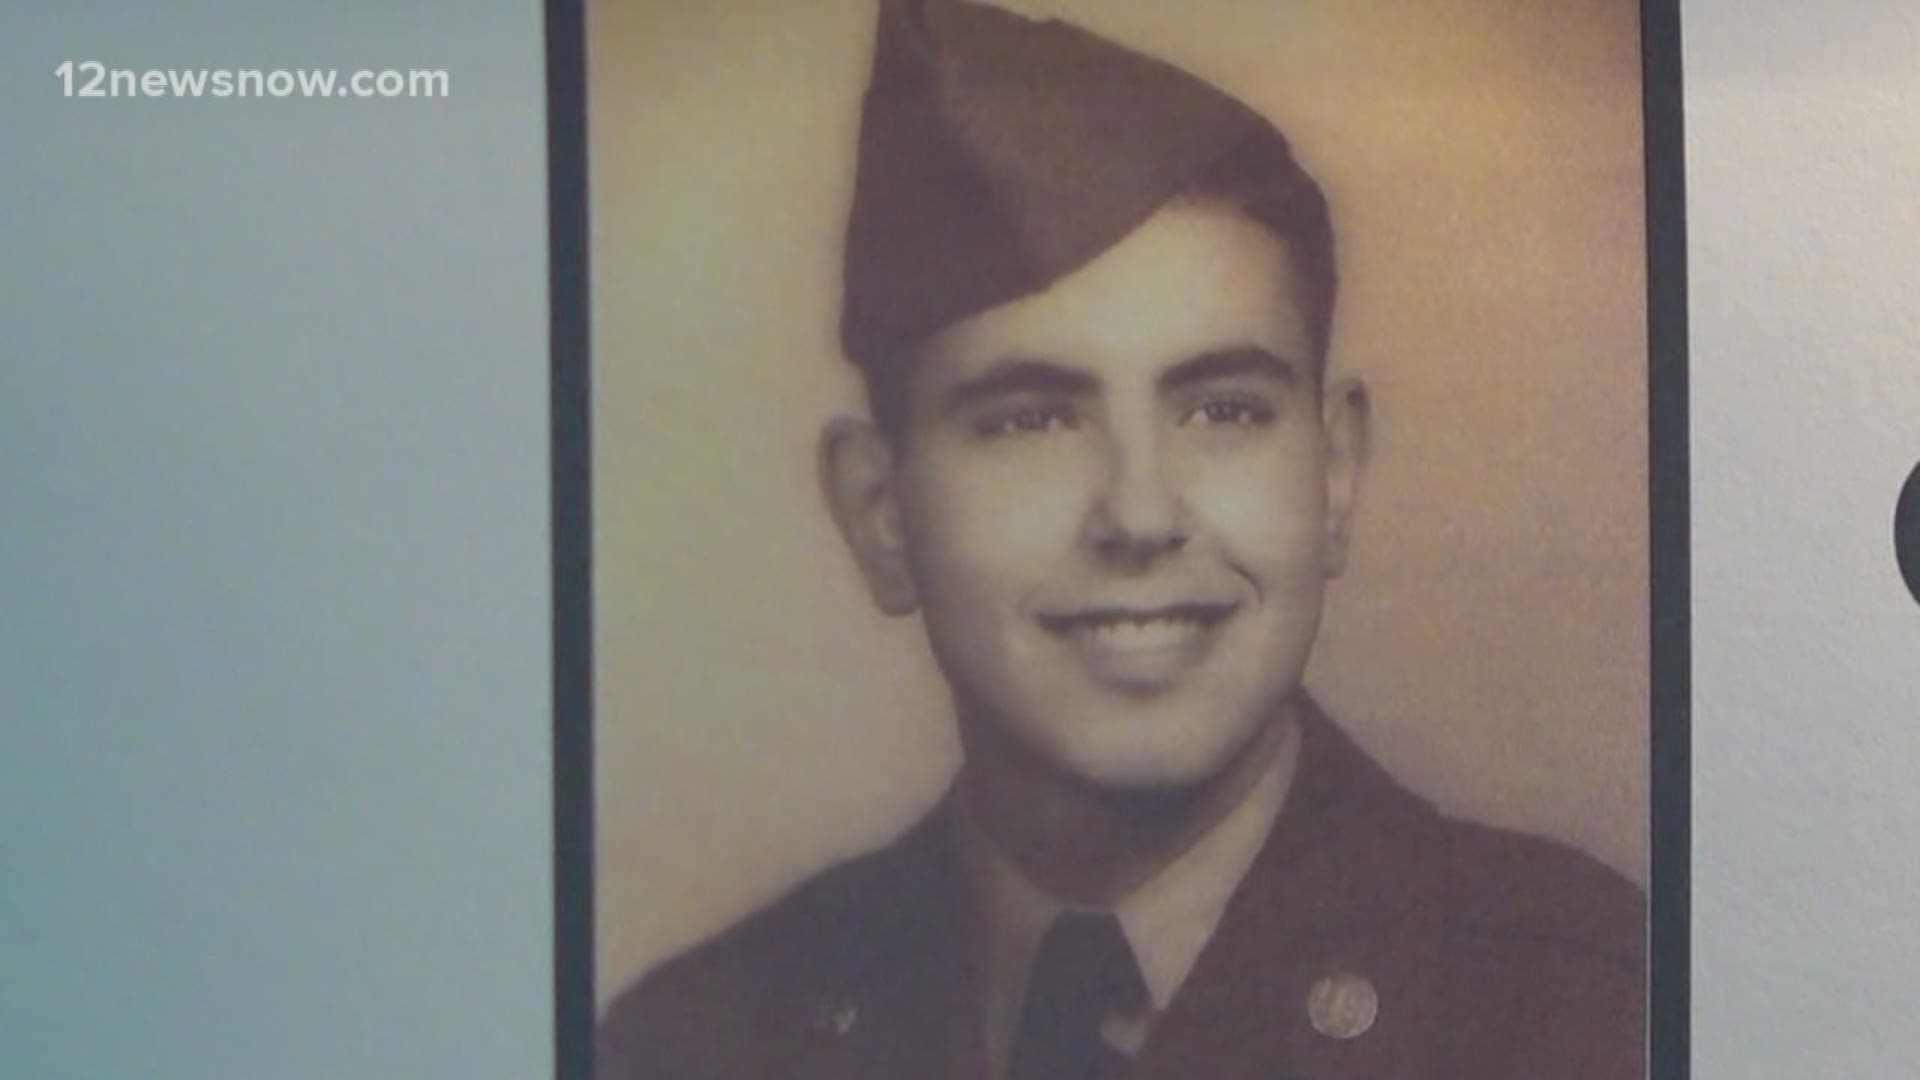 Corporal Autrey J. Betar, 18, served in the U.S. Army during the Korean War when he went missing in 1950.